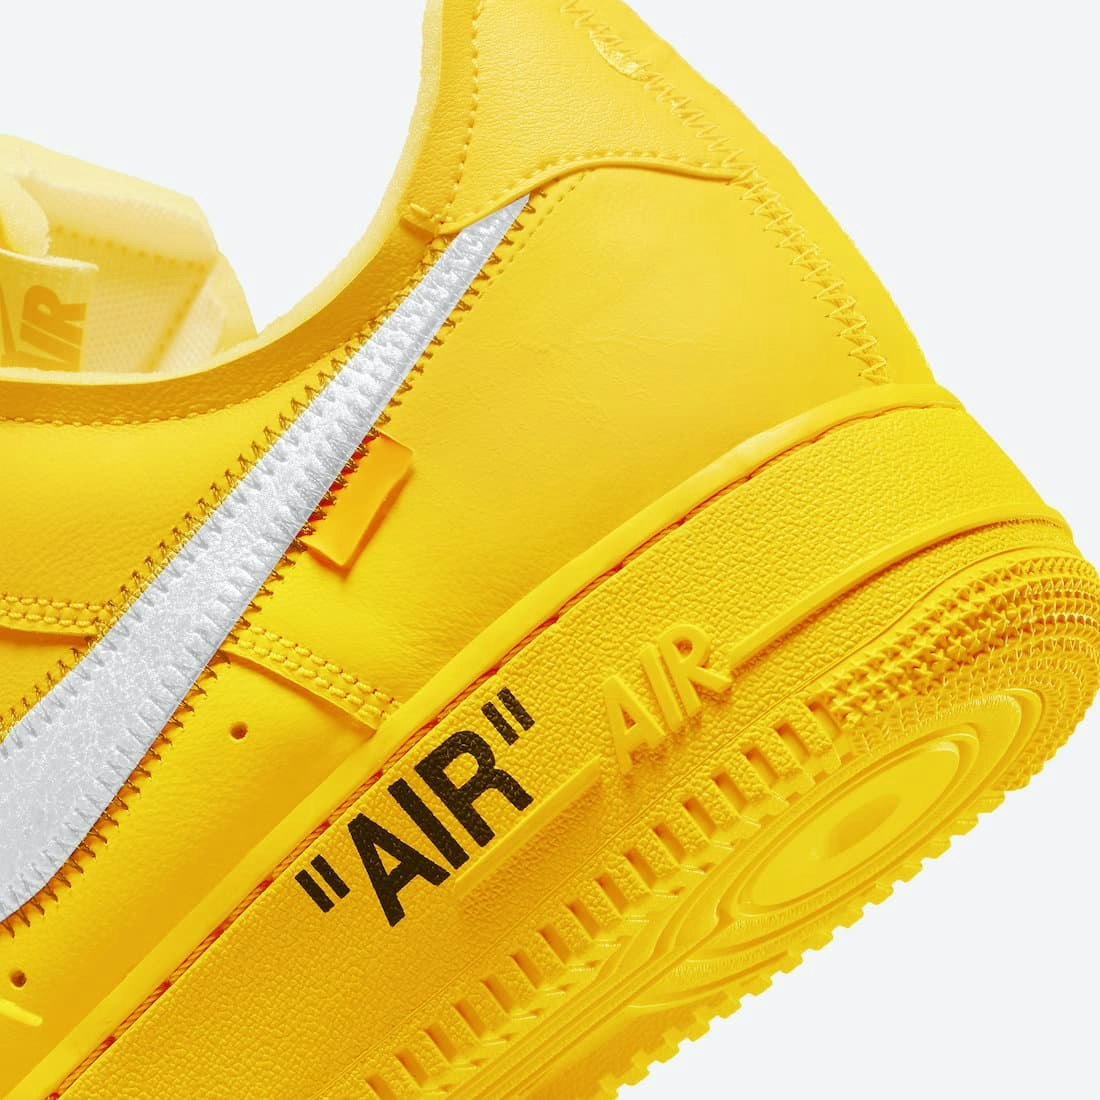 Nike x Off-White Air Force 1 “University Gold”